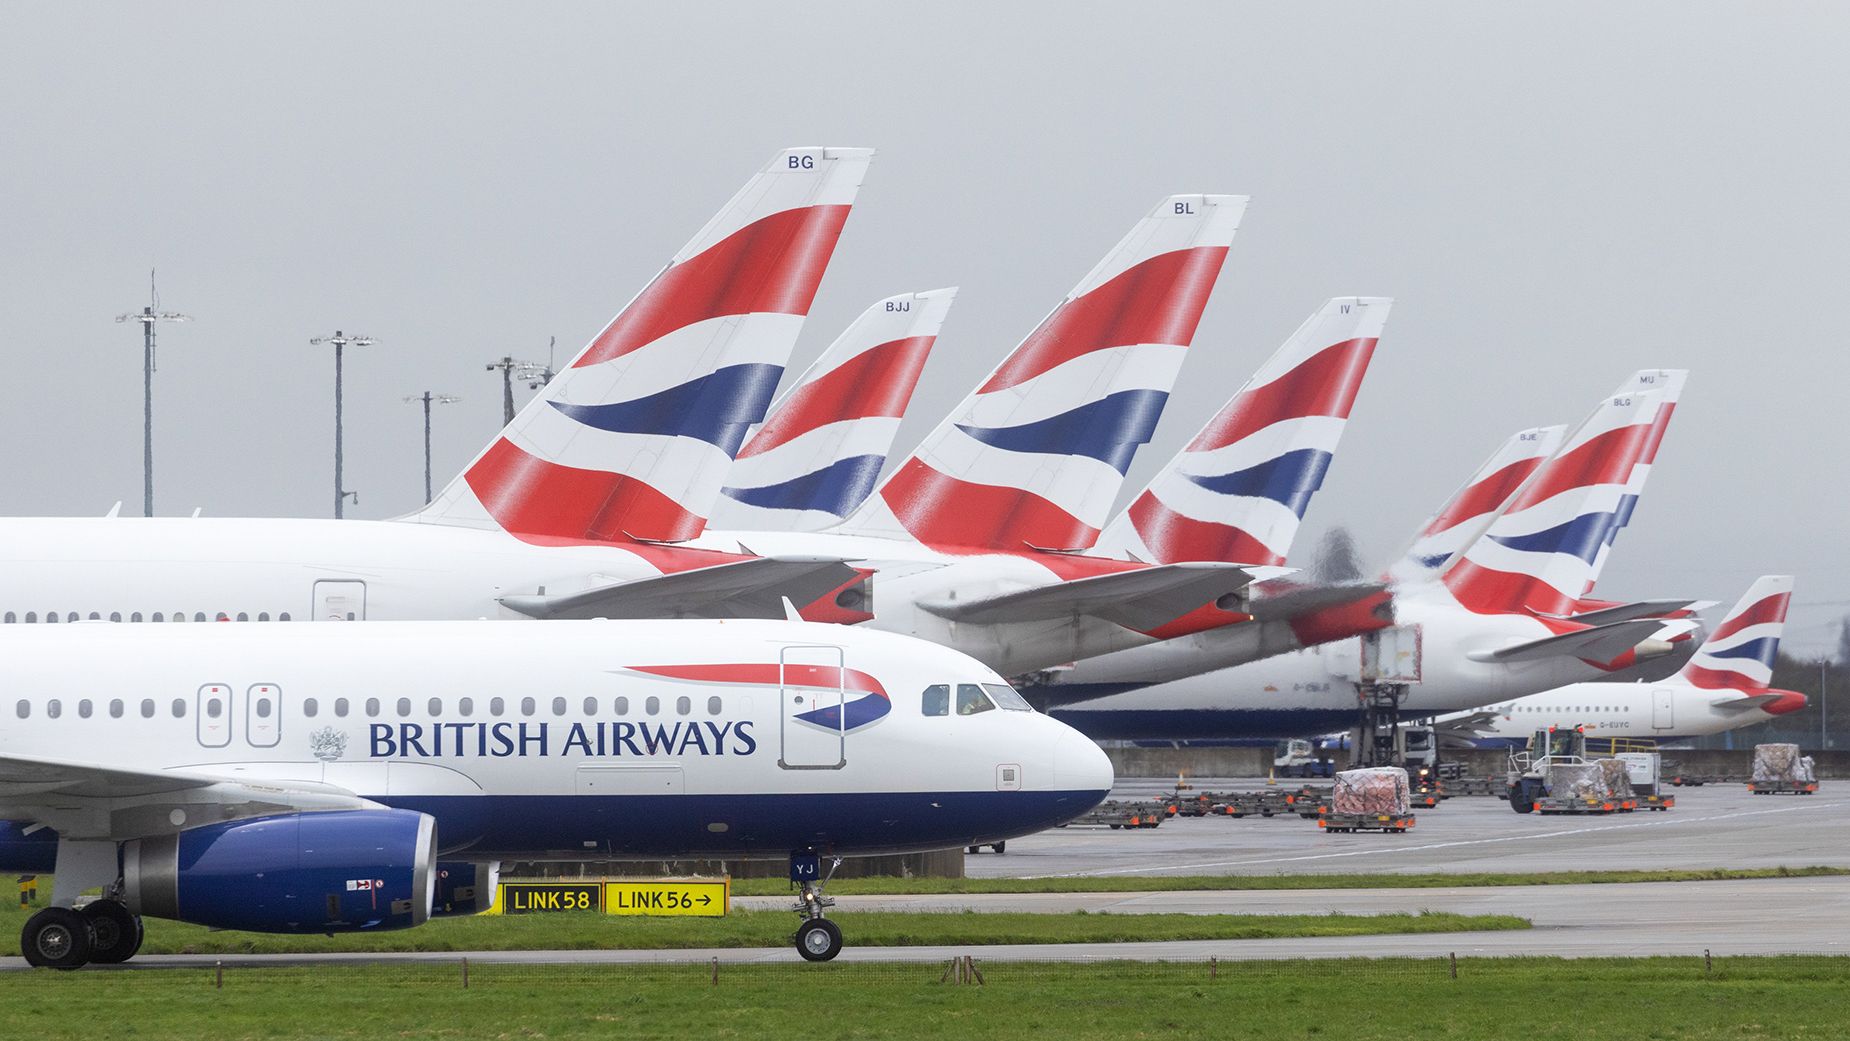 Airplanes operated by British Airways line up on the tarmac at London Heathrow Airport on Friday, March 31, 2023. Flight BA165 from this airport was on approach to Tel Aviv's Ben-Gurion International Airport when it was called back to London.